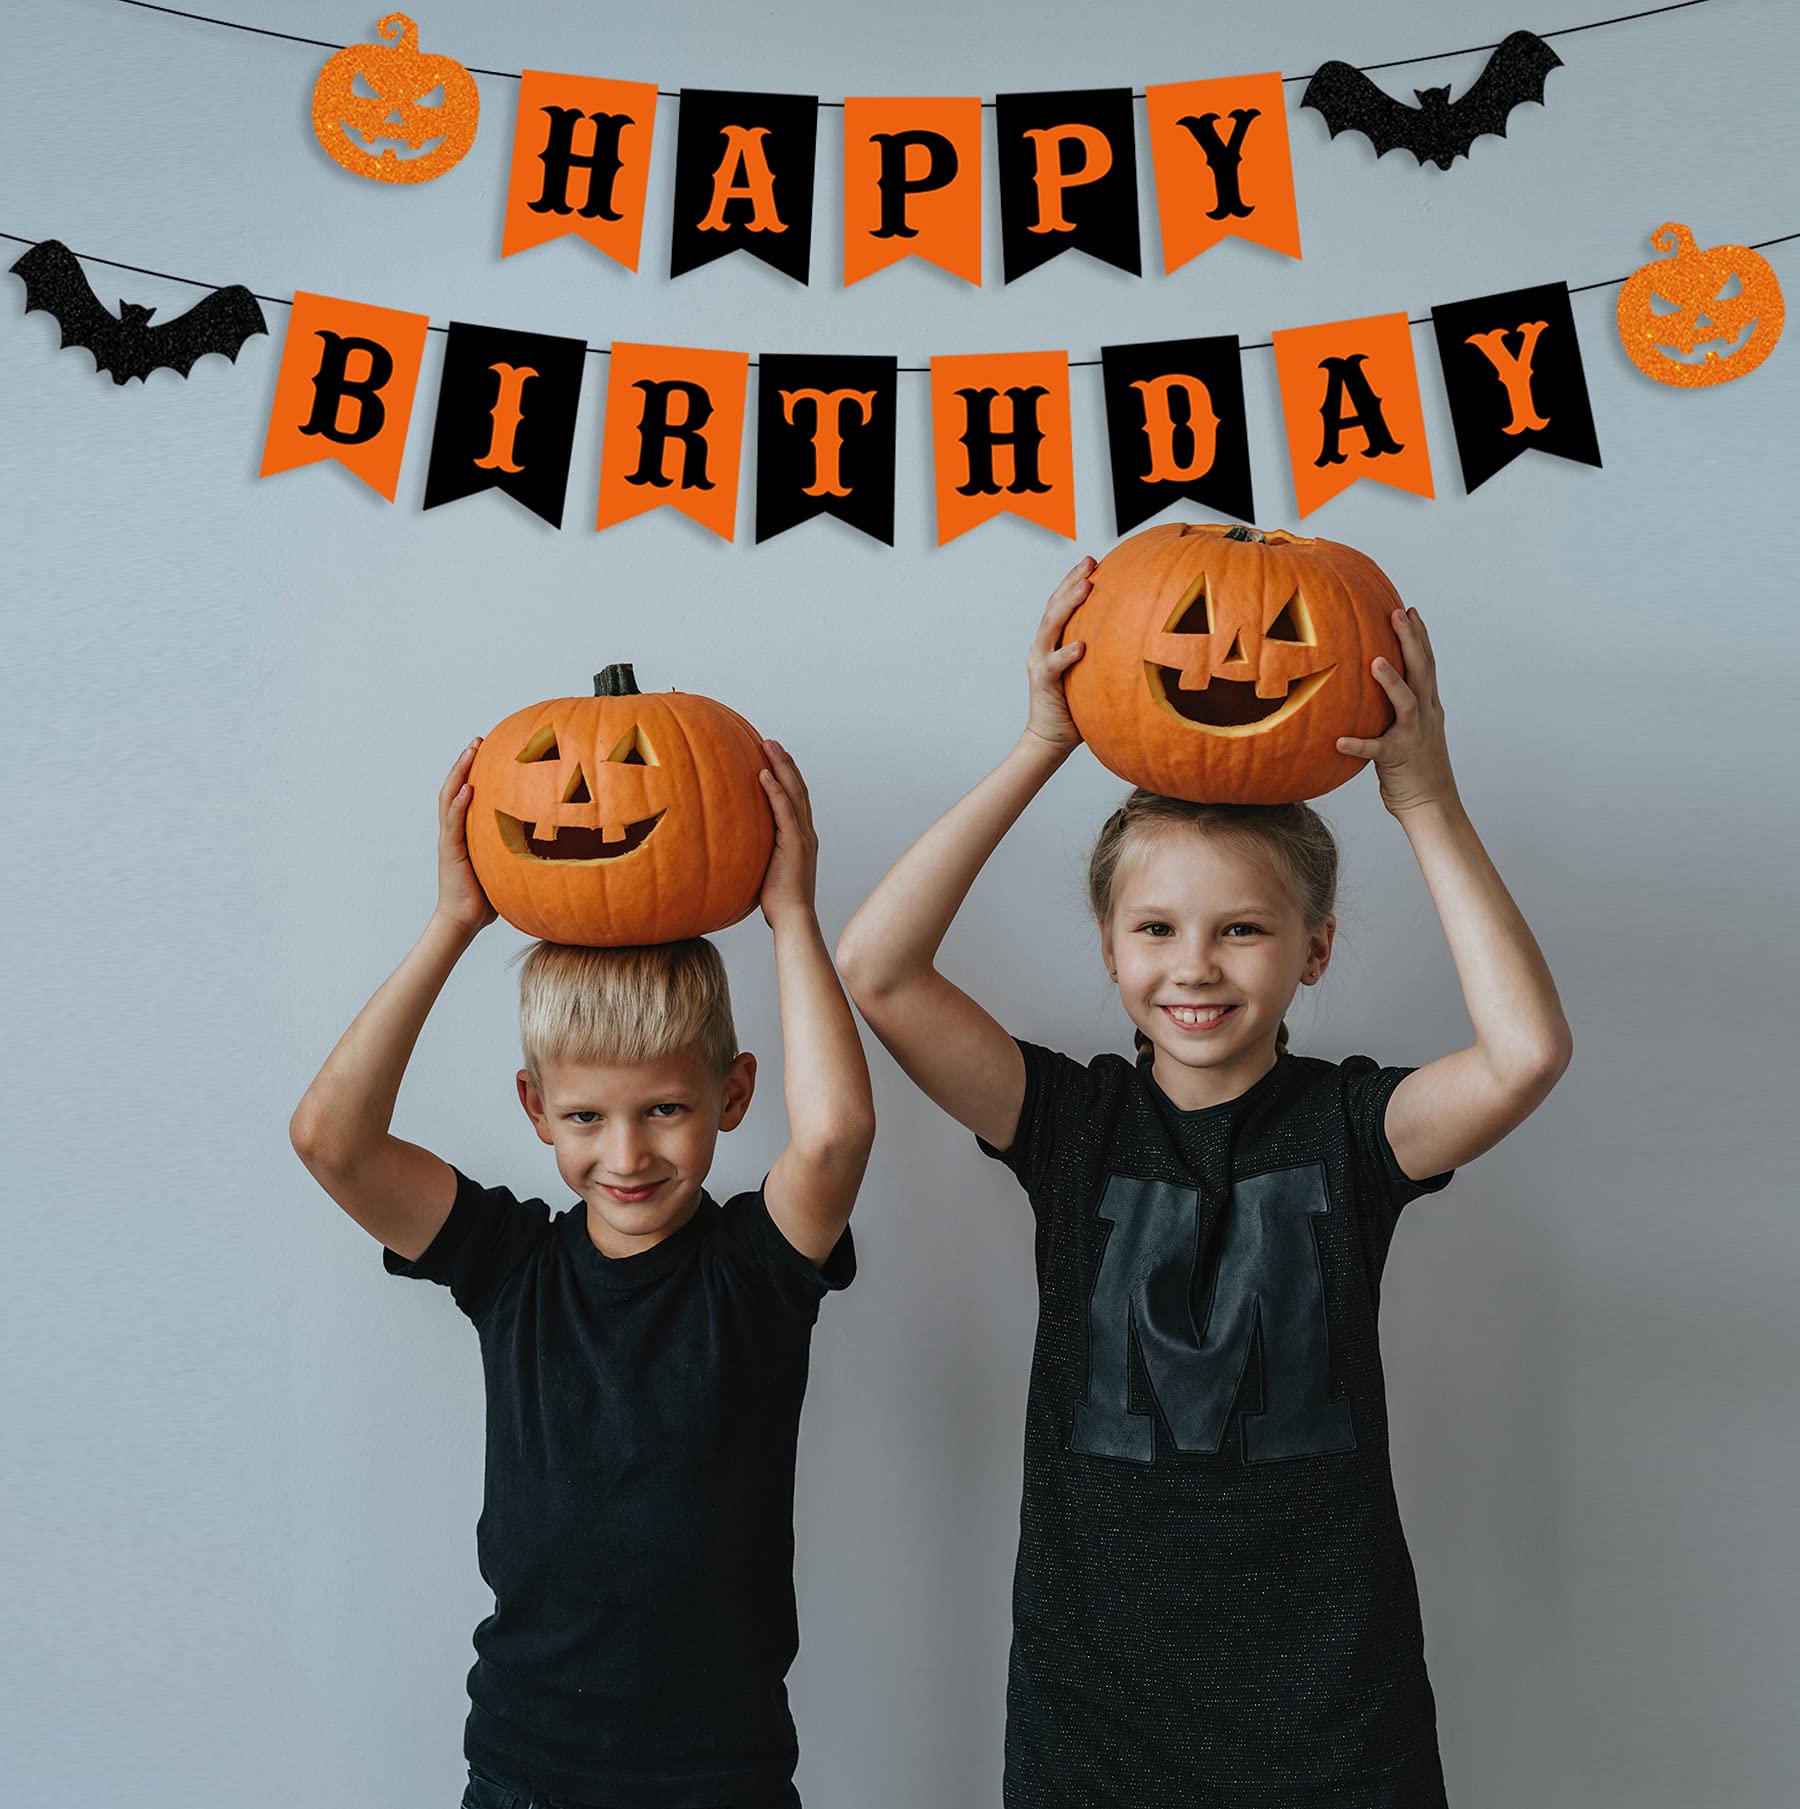 PTFNY Halloween Happy Birthday Banner Black Orange Halloween Birthday Bunting Banner with Pumpkin and Bat Signs Halloween Themed Birthday Party Decorations for Wall Fireplace Party Decor Supplies